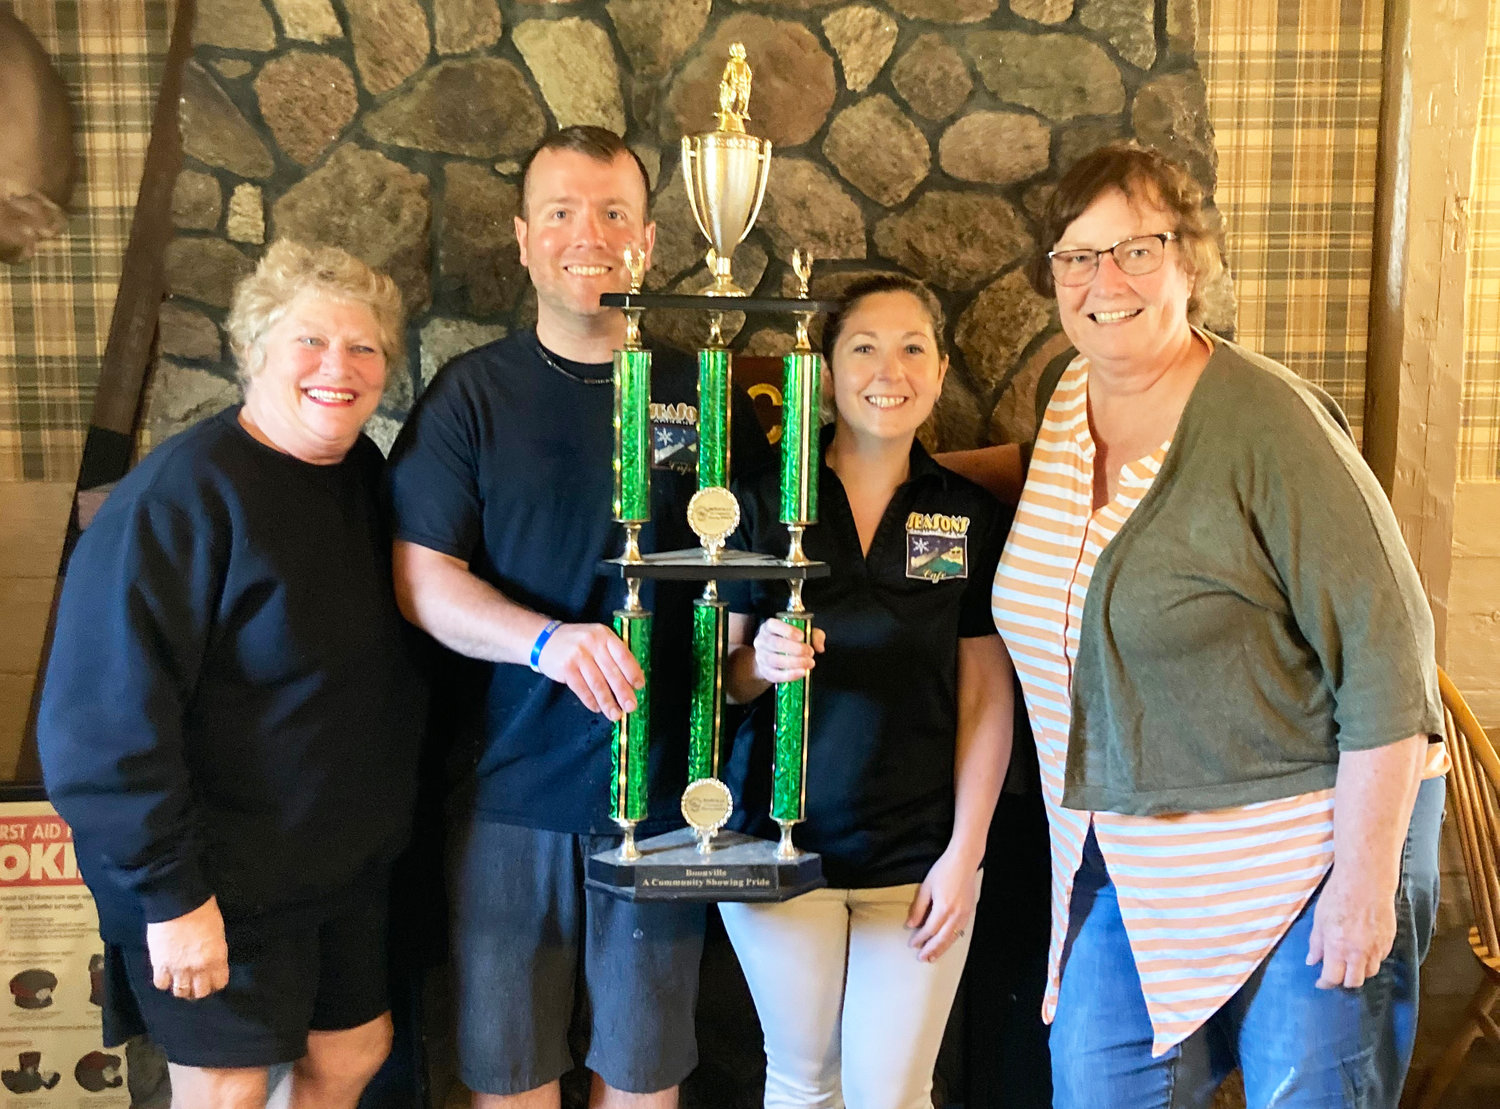 Seasons Cafe owners Jake and Erin Gydesen holding the Boonville Area Chamber of Commerce ‘Business of the Month’ traveling trophy. At left is chamber director Lee Ann Greene, and at right is chamber vice president Patti McDaniel.